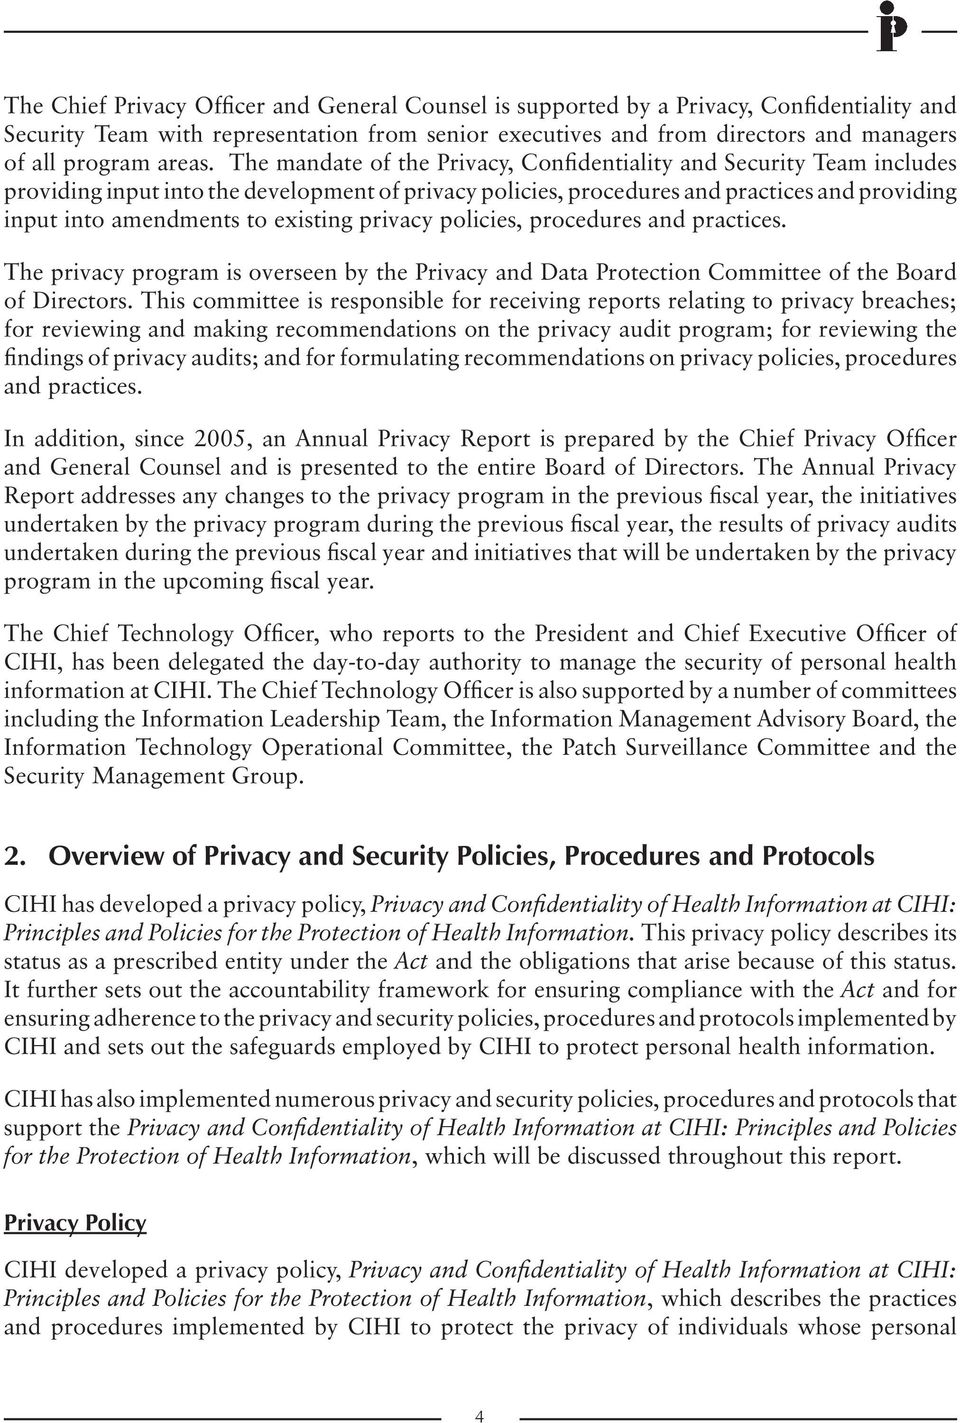 The mandate of the Privacy, Confidentiality and Security Team includes providing input into the development of privacy policies, procedures and practices and providing input into amendments to